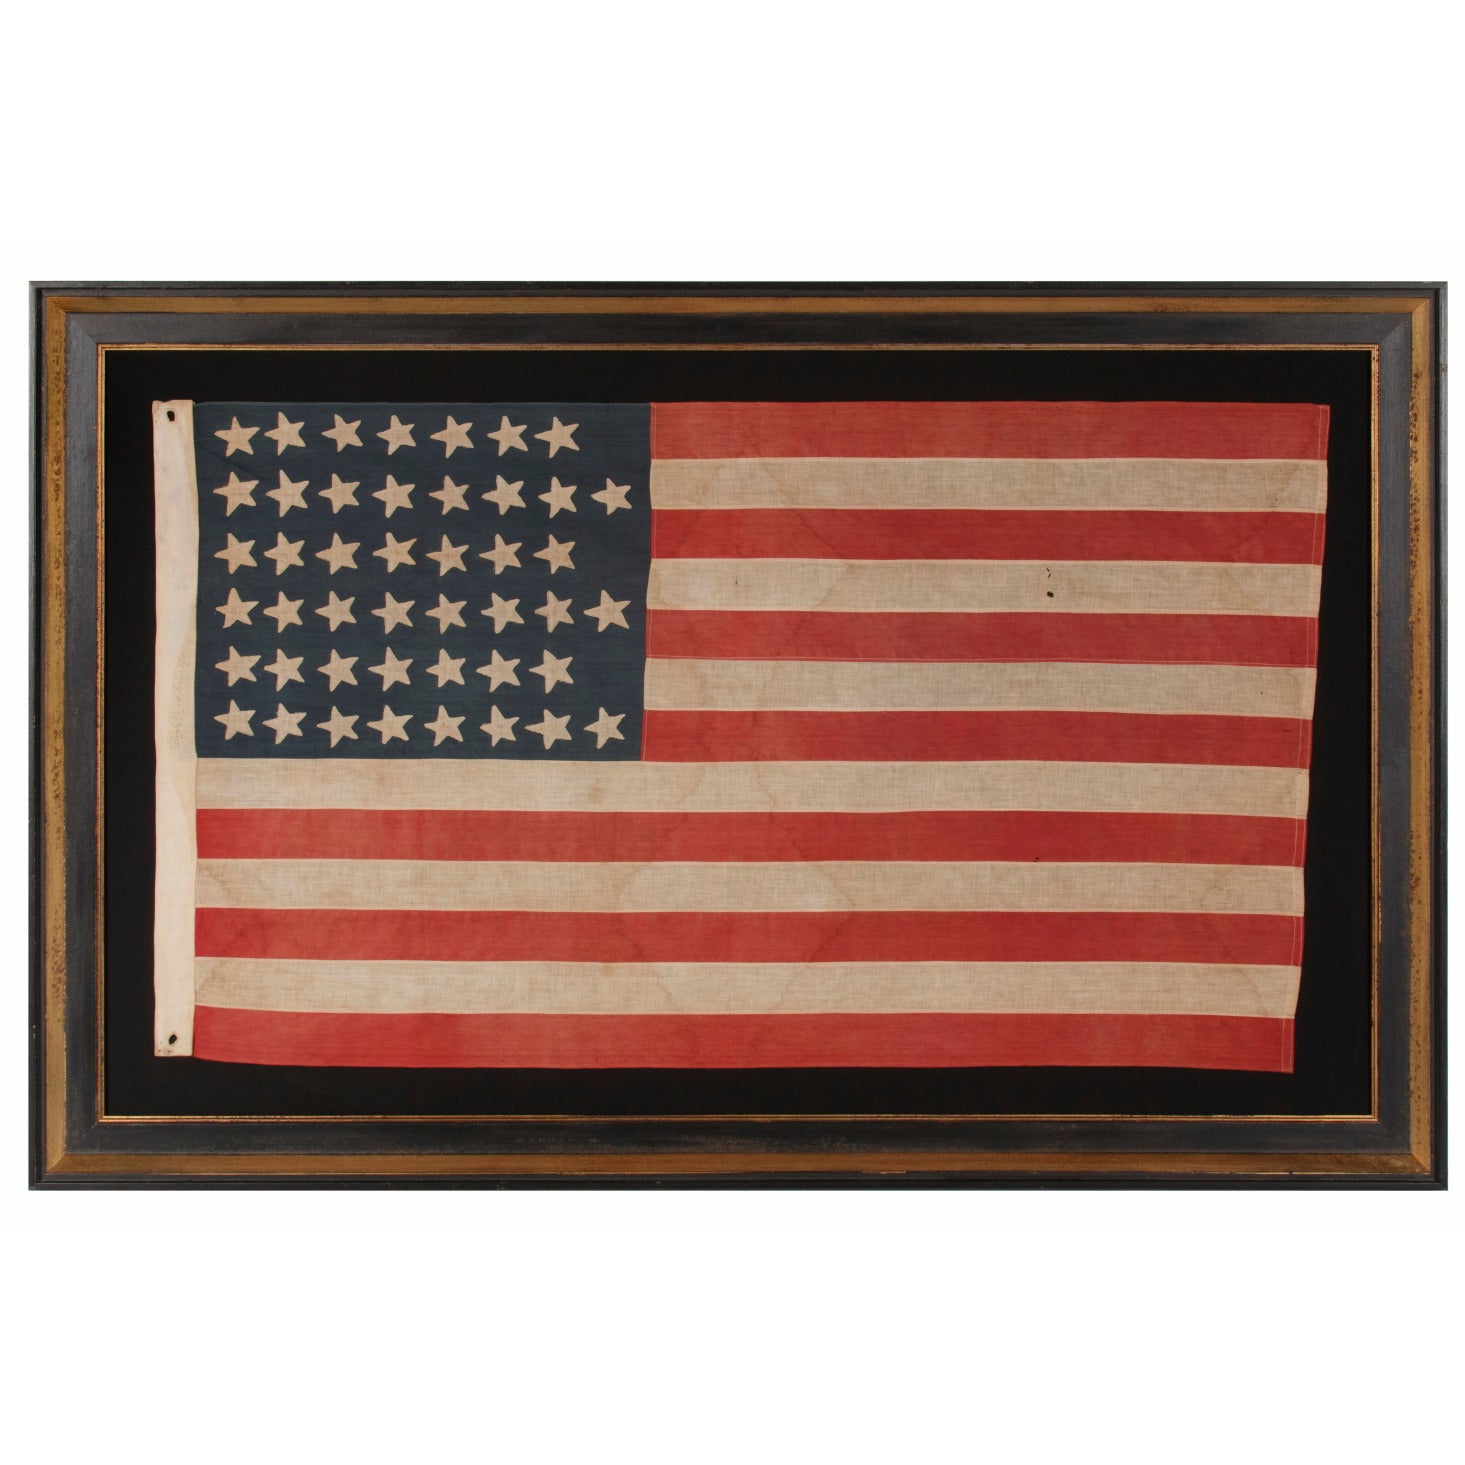 45 Star Flag with Stars in a "Notched" Design